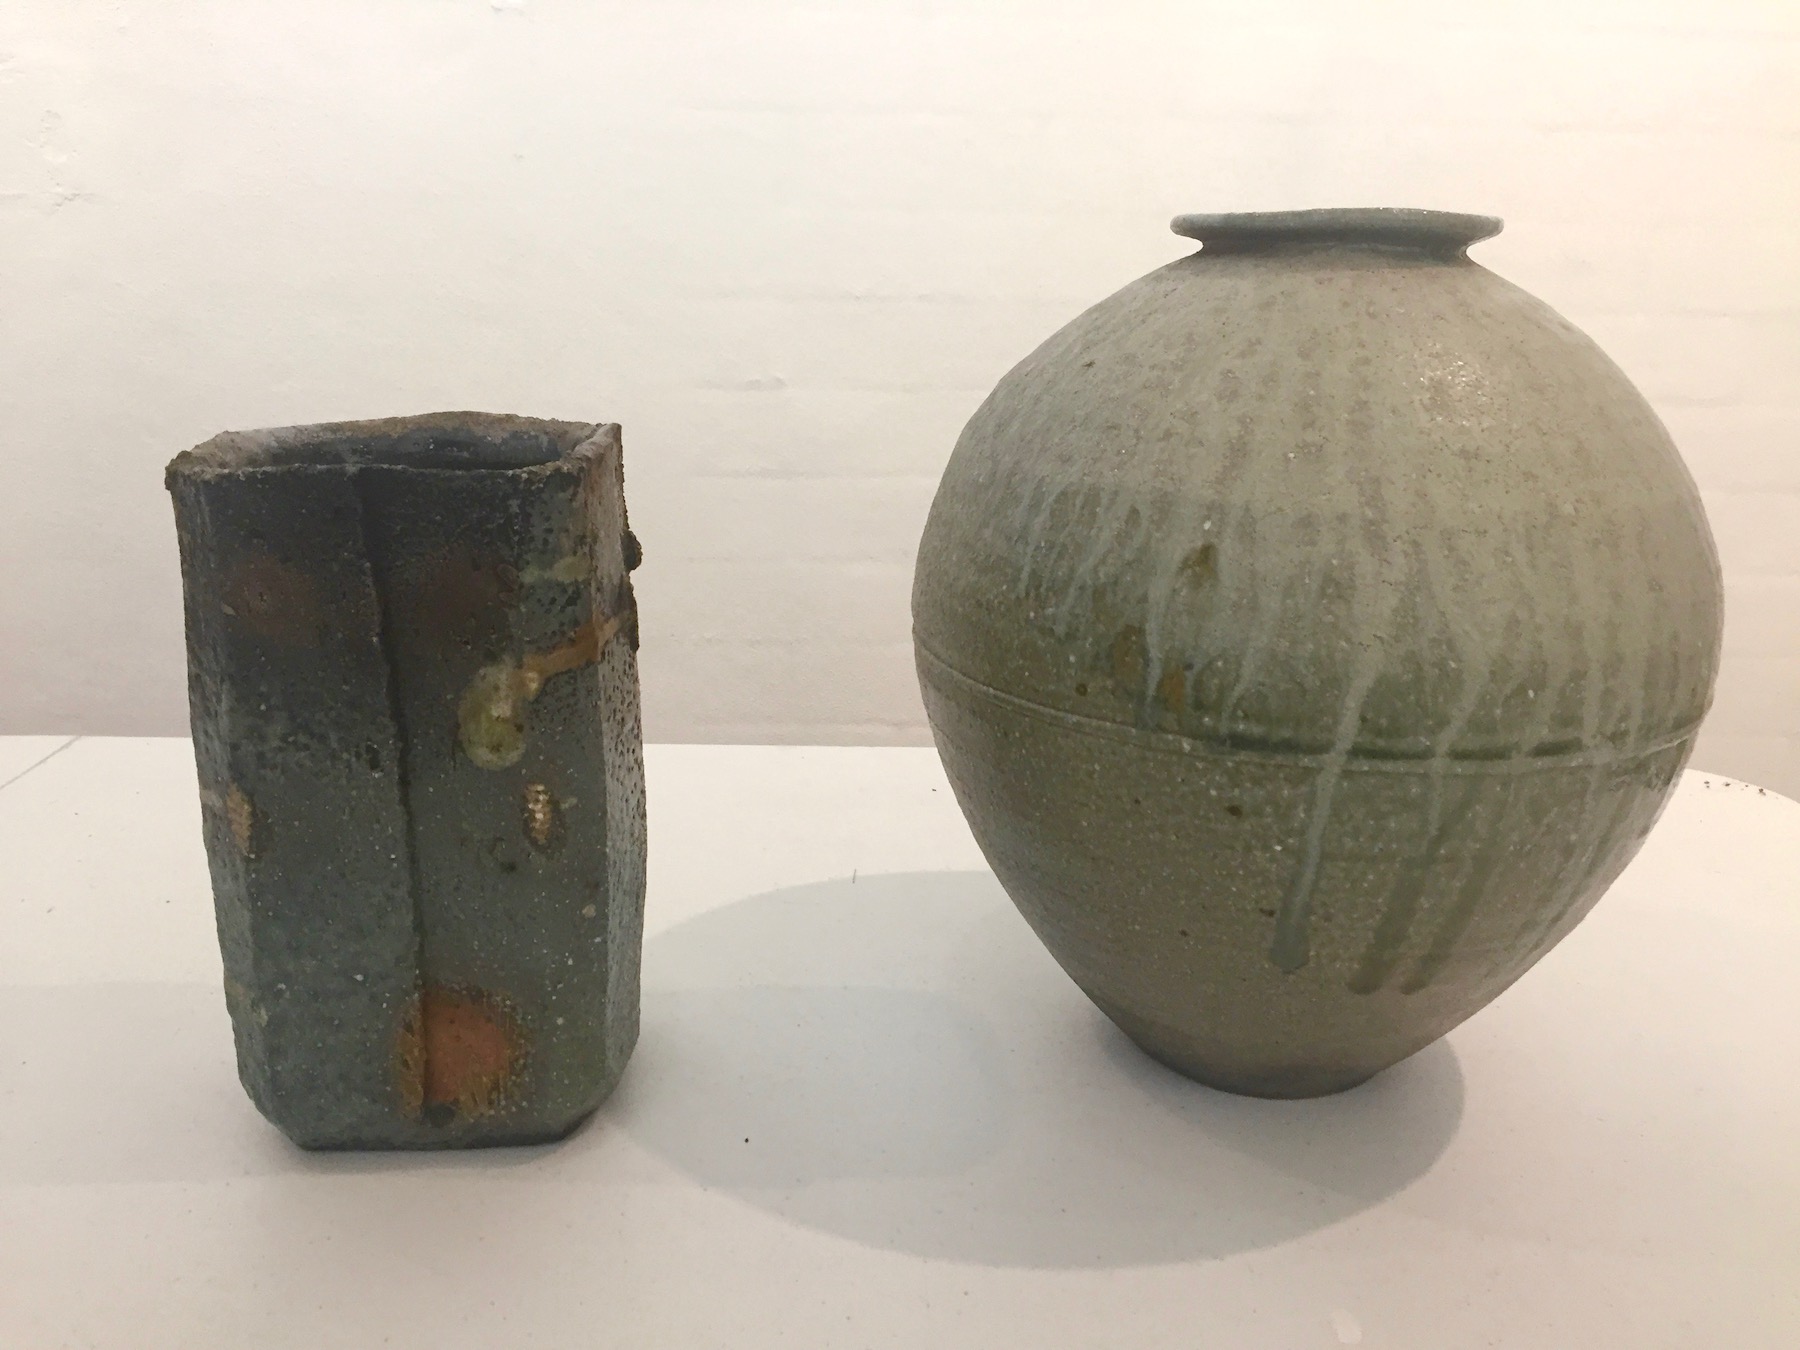 Sculptors and ceramicists donate works to raise fire recovery funds